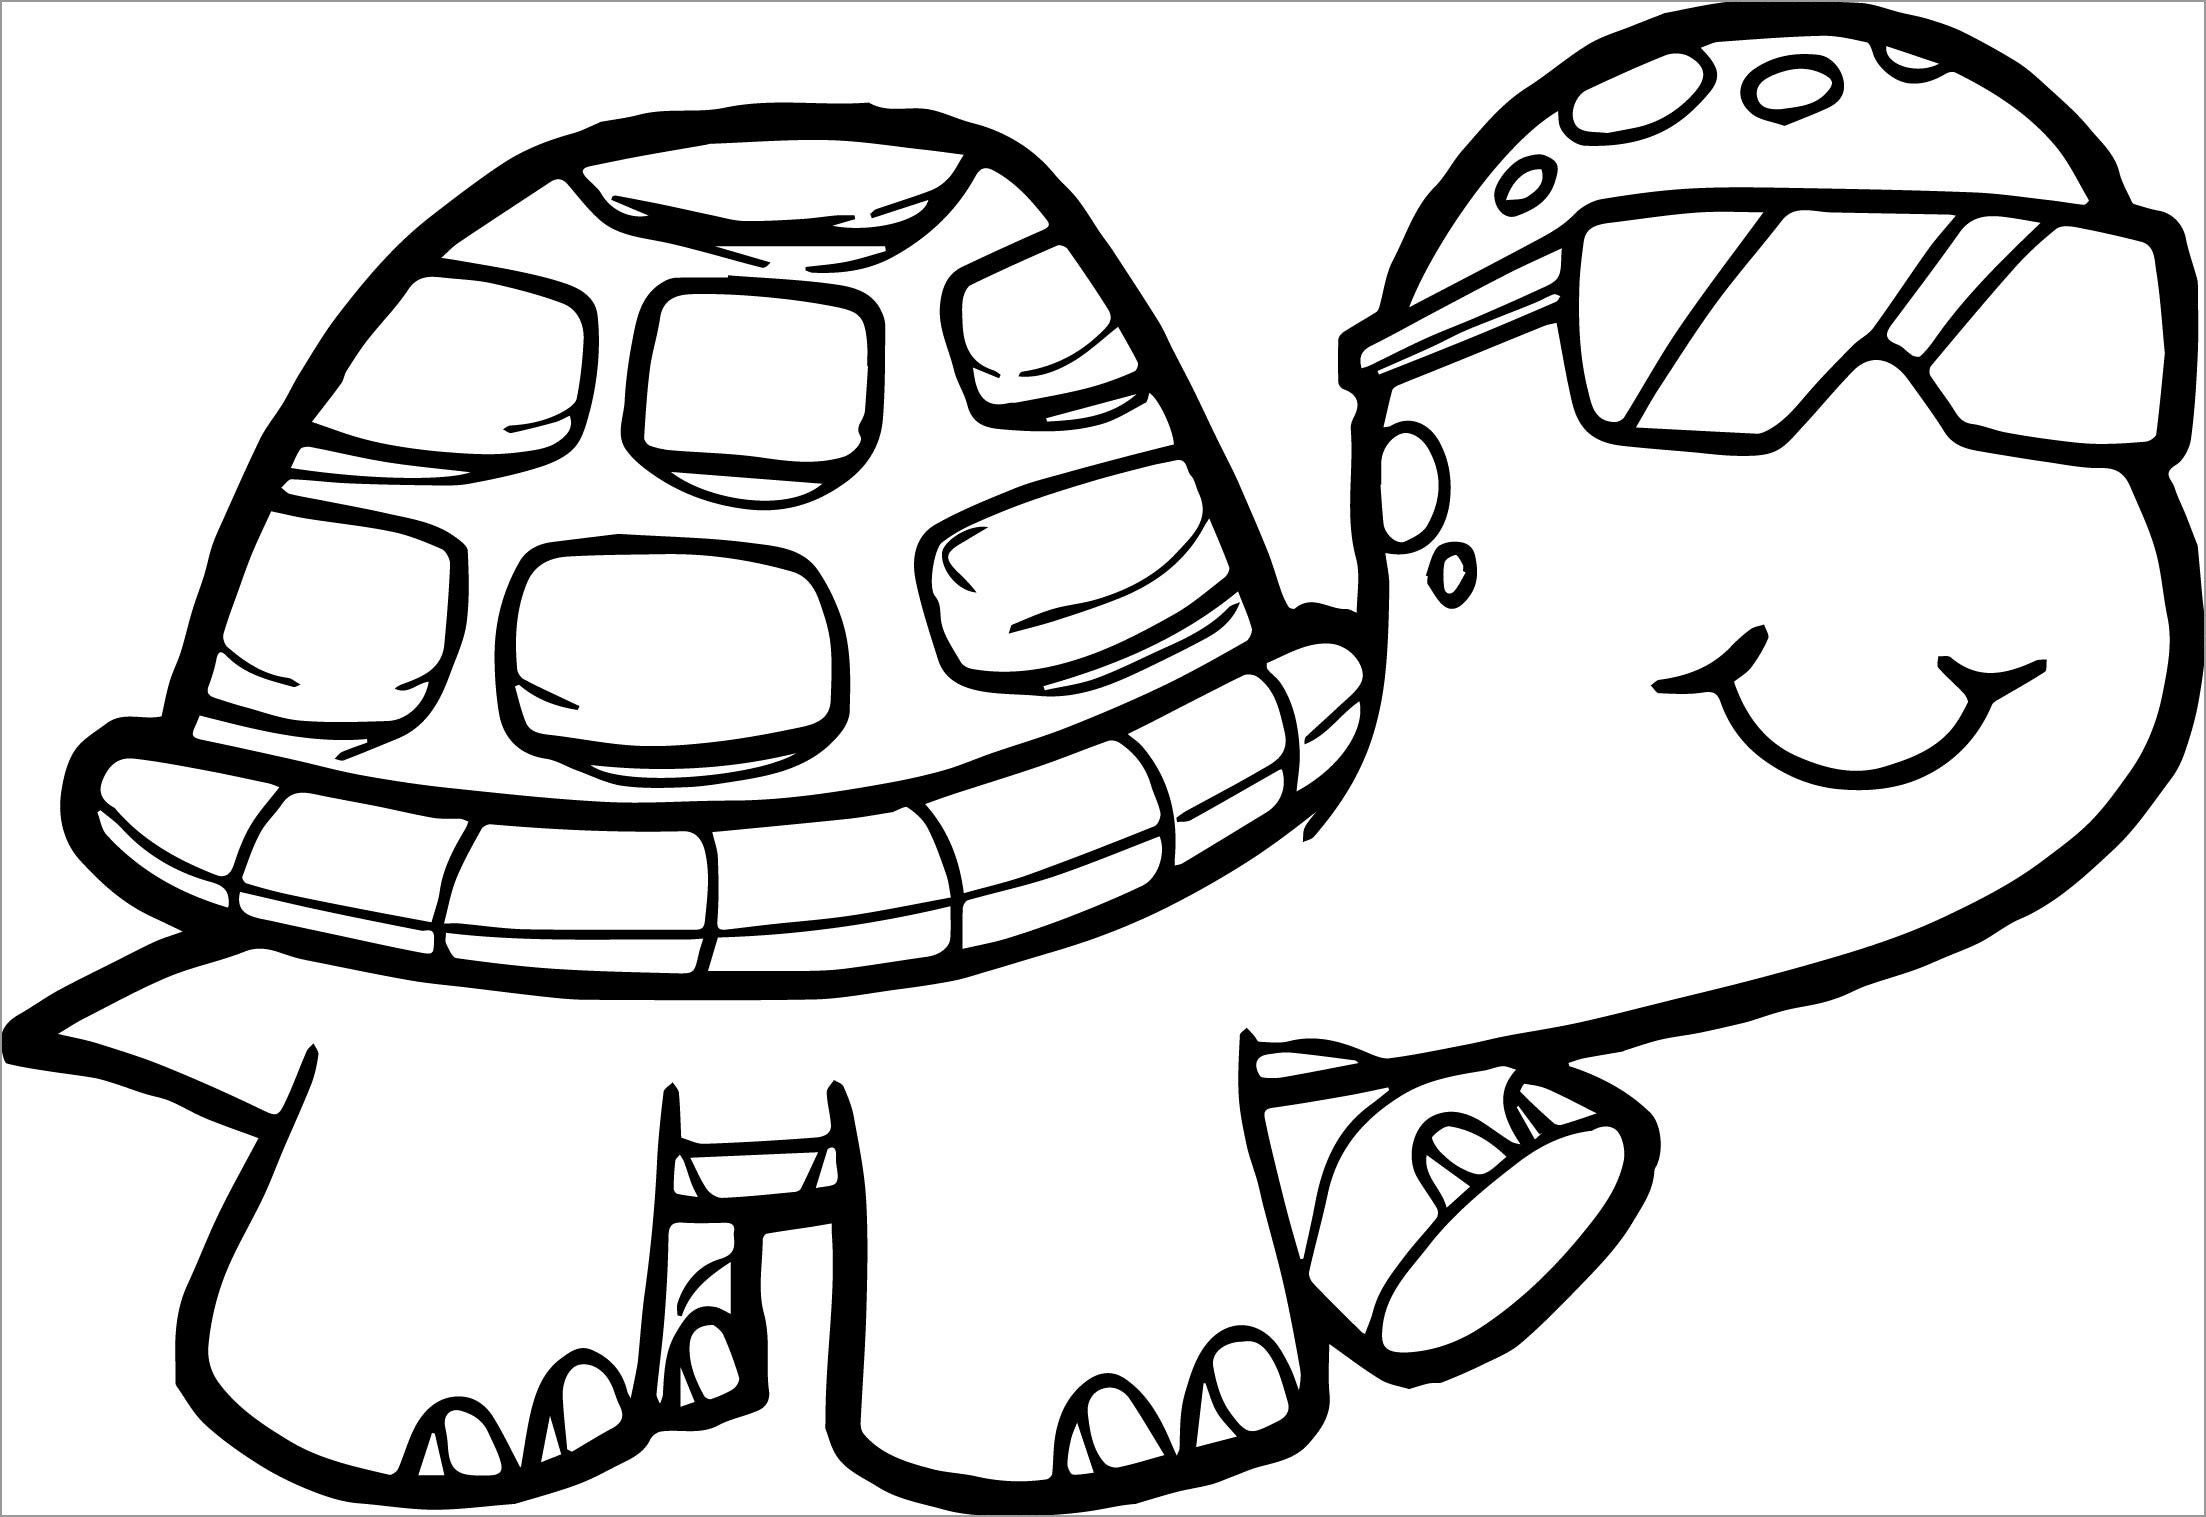 Cool tortoise Coloring Page for Kids